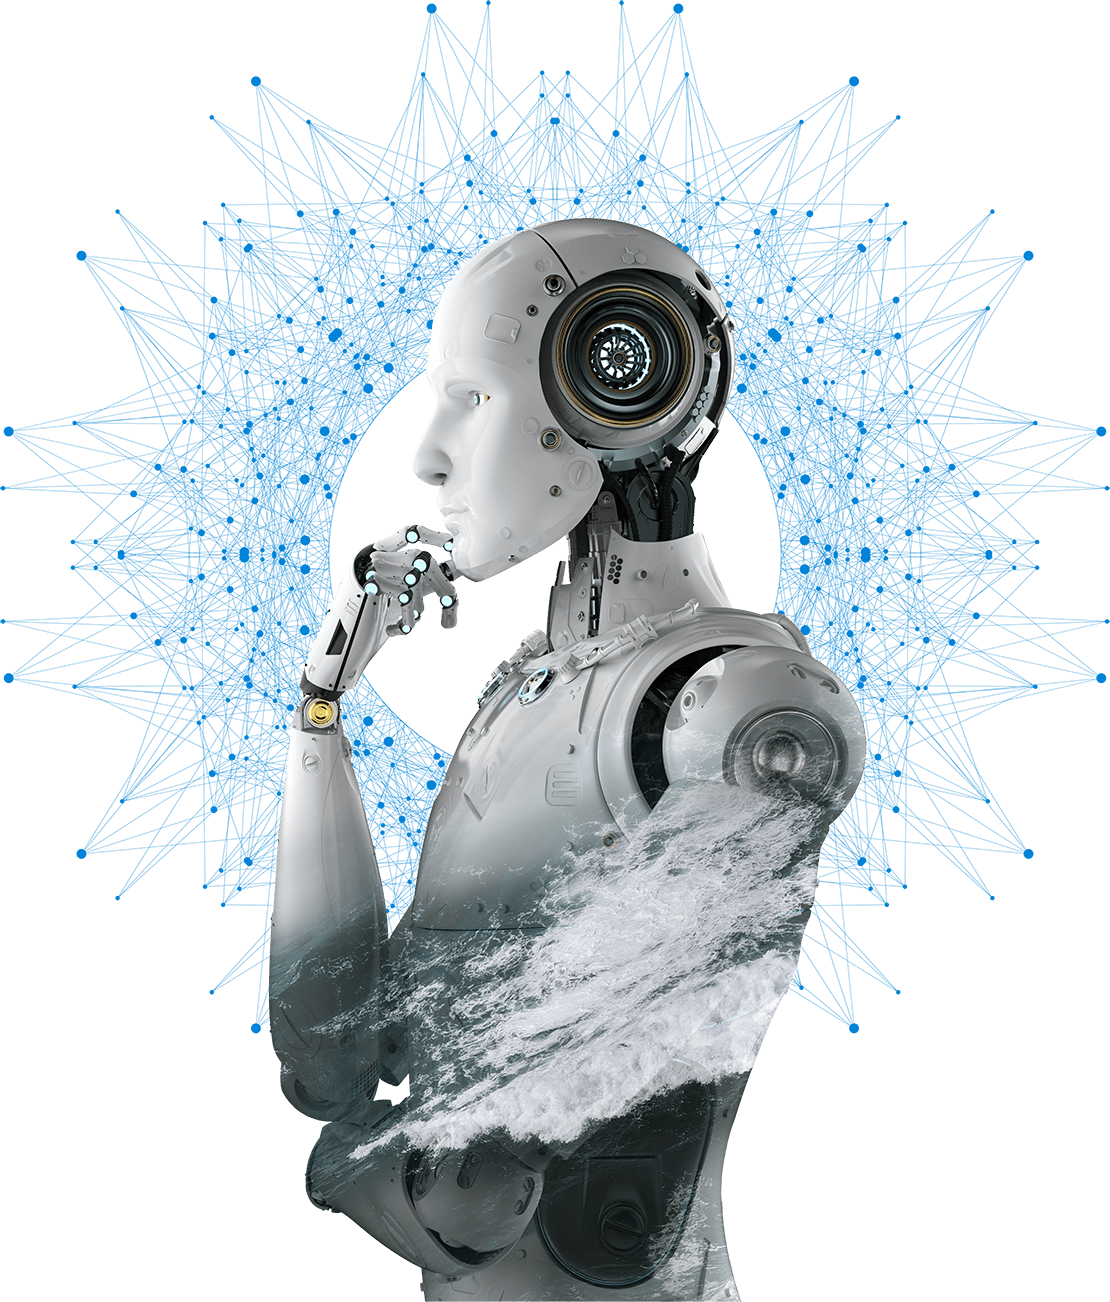 kisspng-humanoid-robot-stock-photography-artificial-intell-5d119ee4557f71.1077304315614358763502